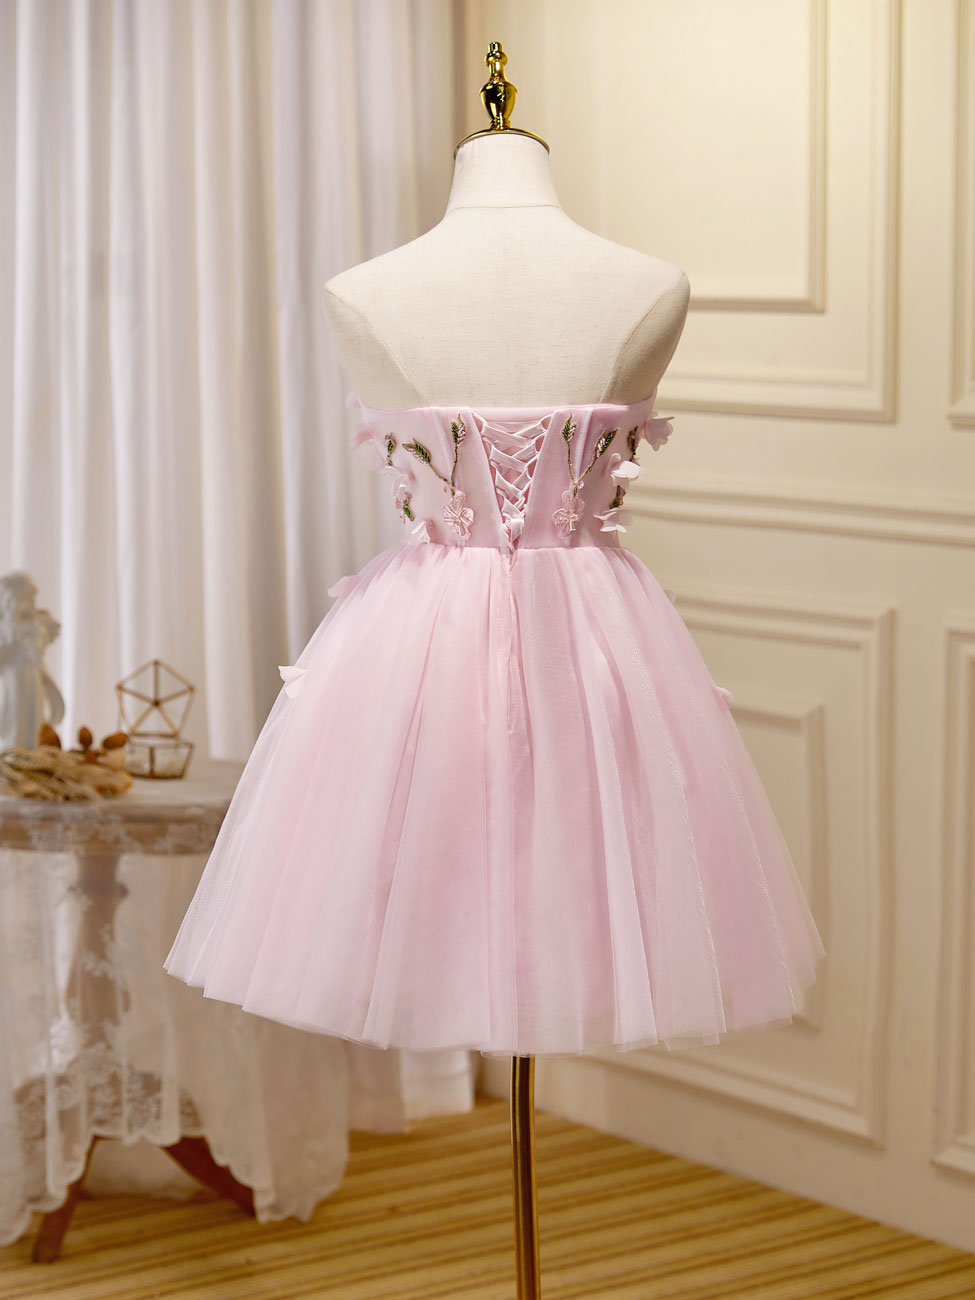 Prom Dress Long Ball Gown, Mini/Short Pink Prom Dress, Cute Pink Homecoming Dresses with Beading Applique